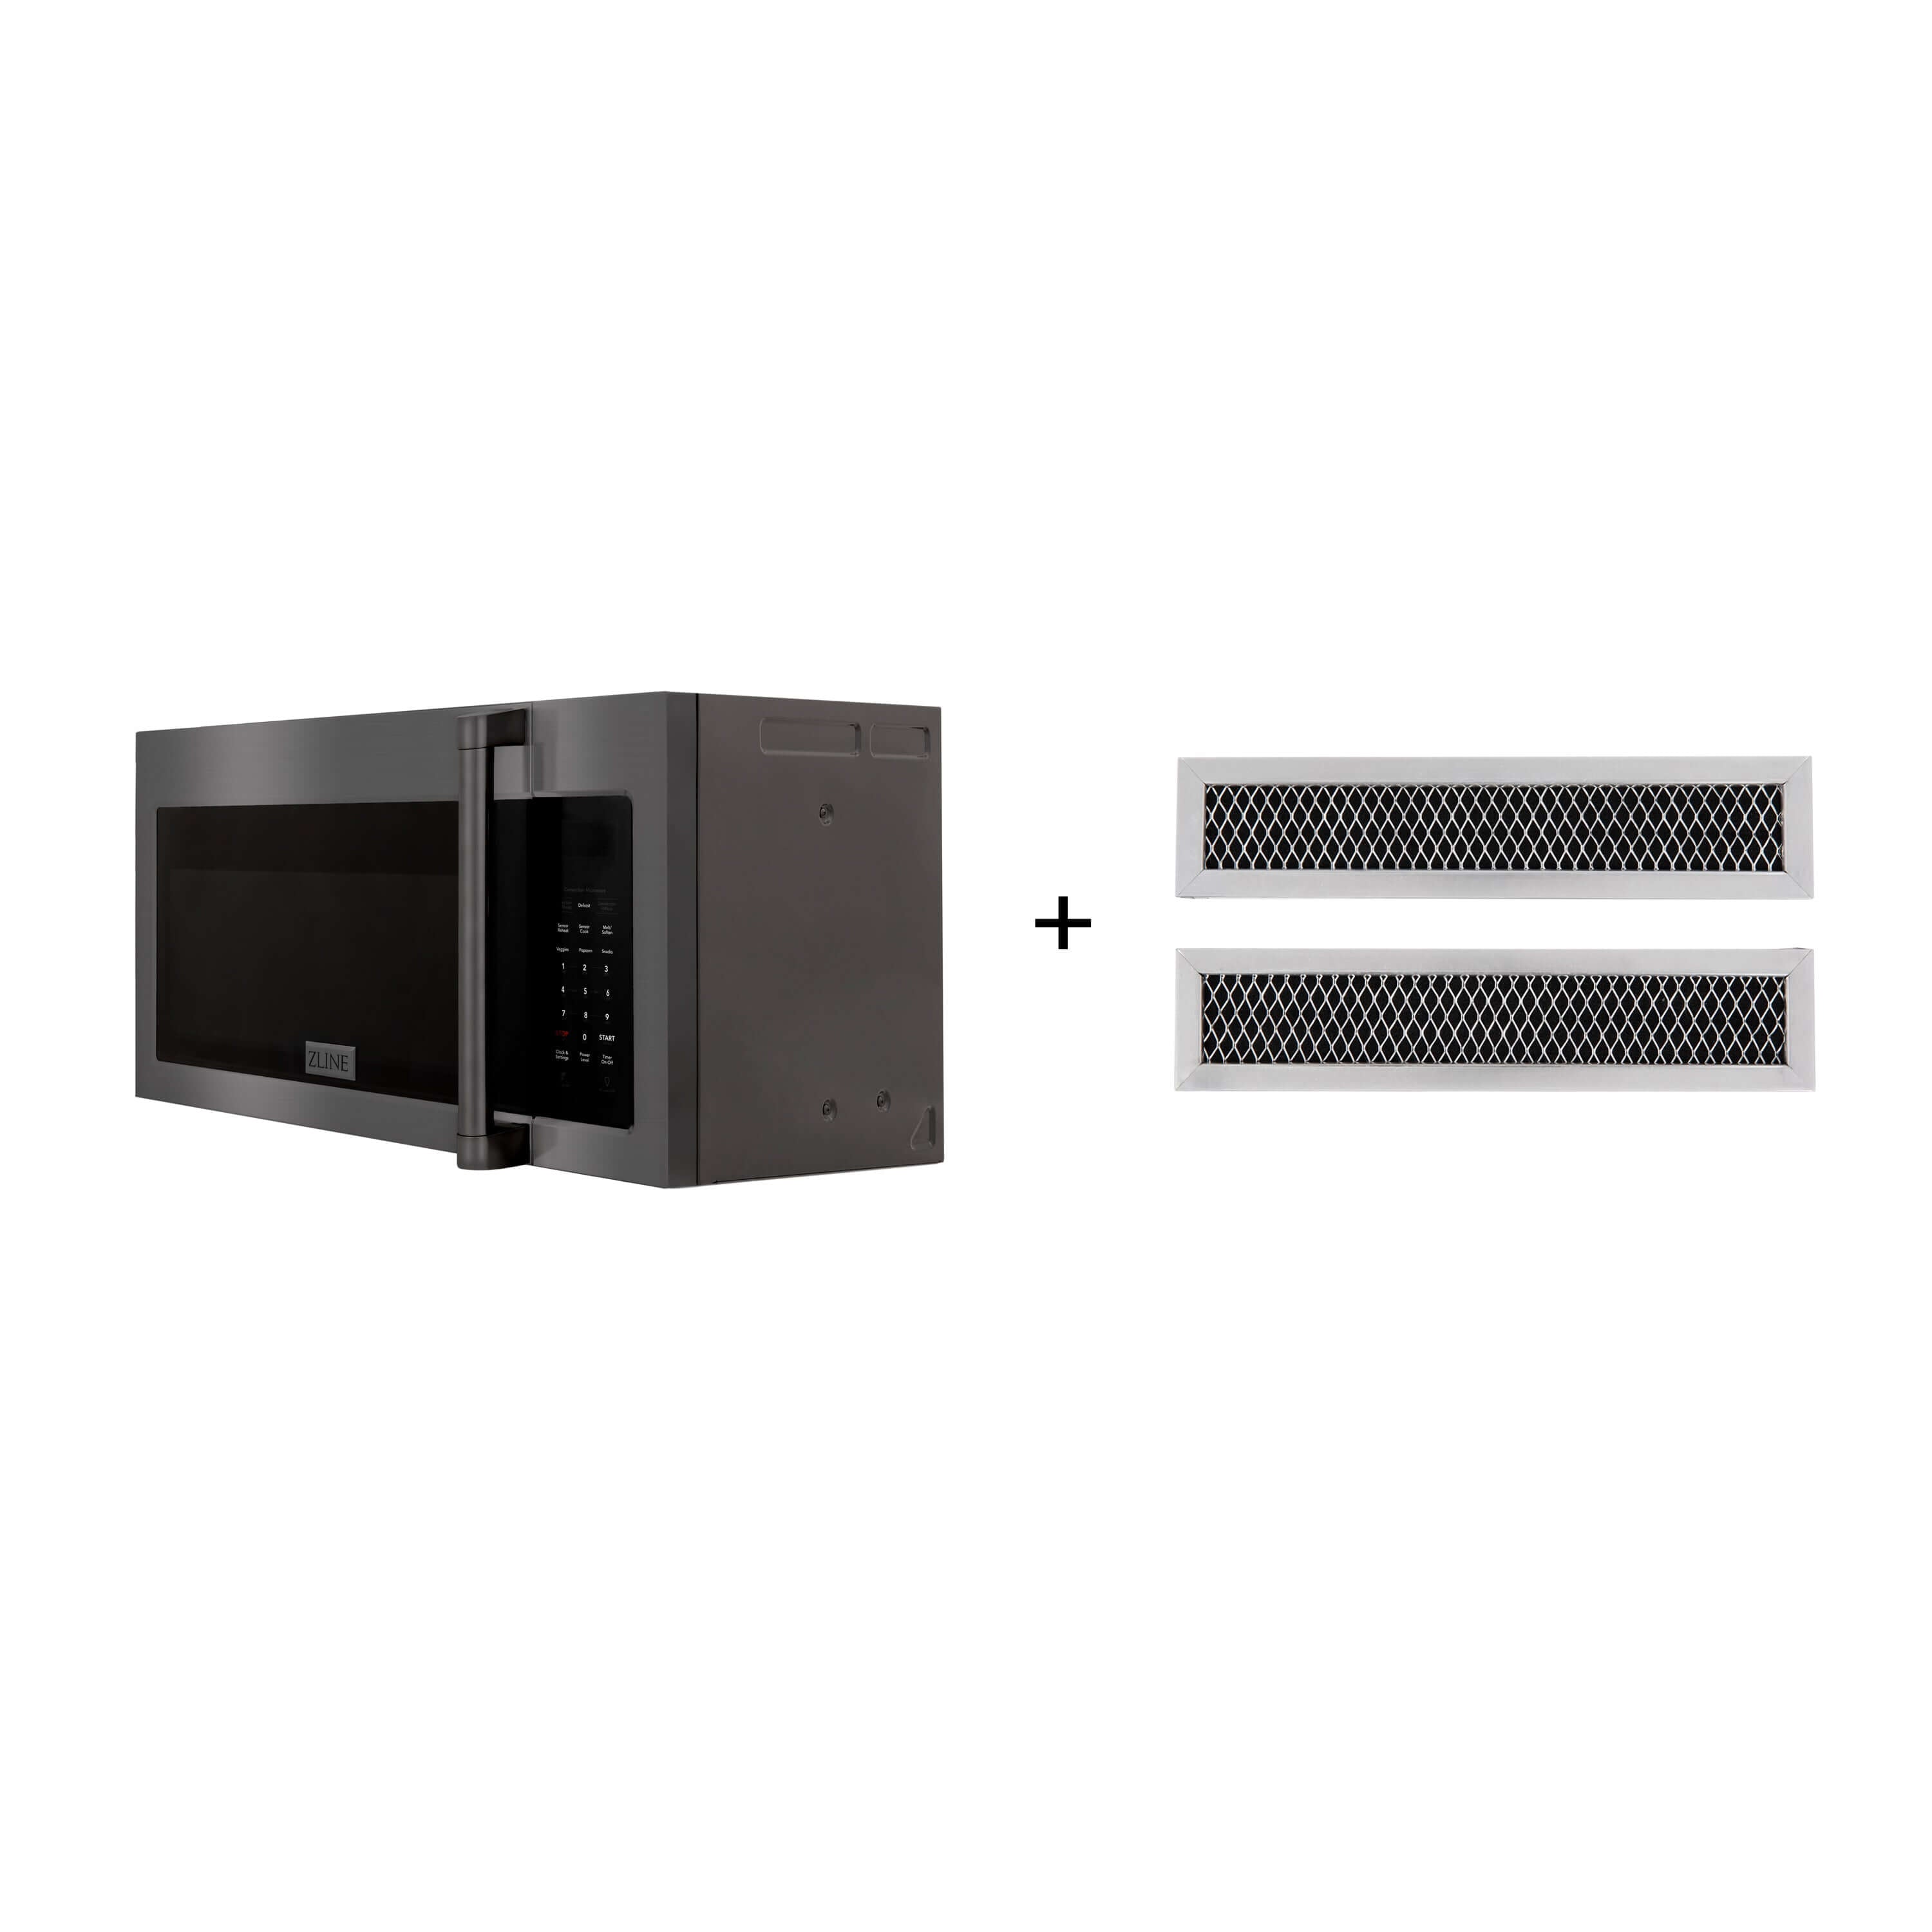 ZLINE 30 in. Recirculating Over the Range Convection Microwave Oven with Traditional Handle and Charcoal Filters in Black Stainless Steel (MWO-OTRCFH-30-BS)